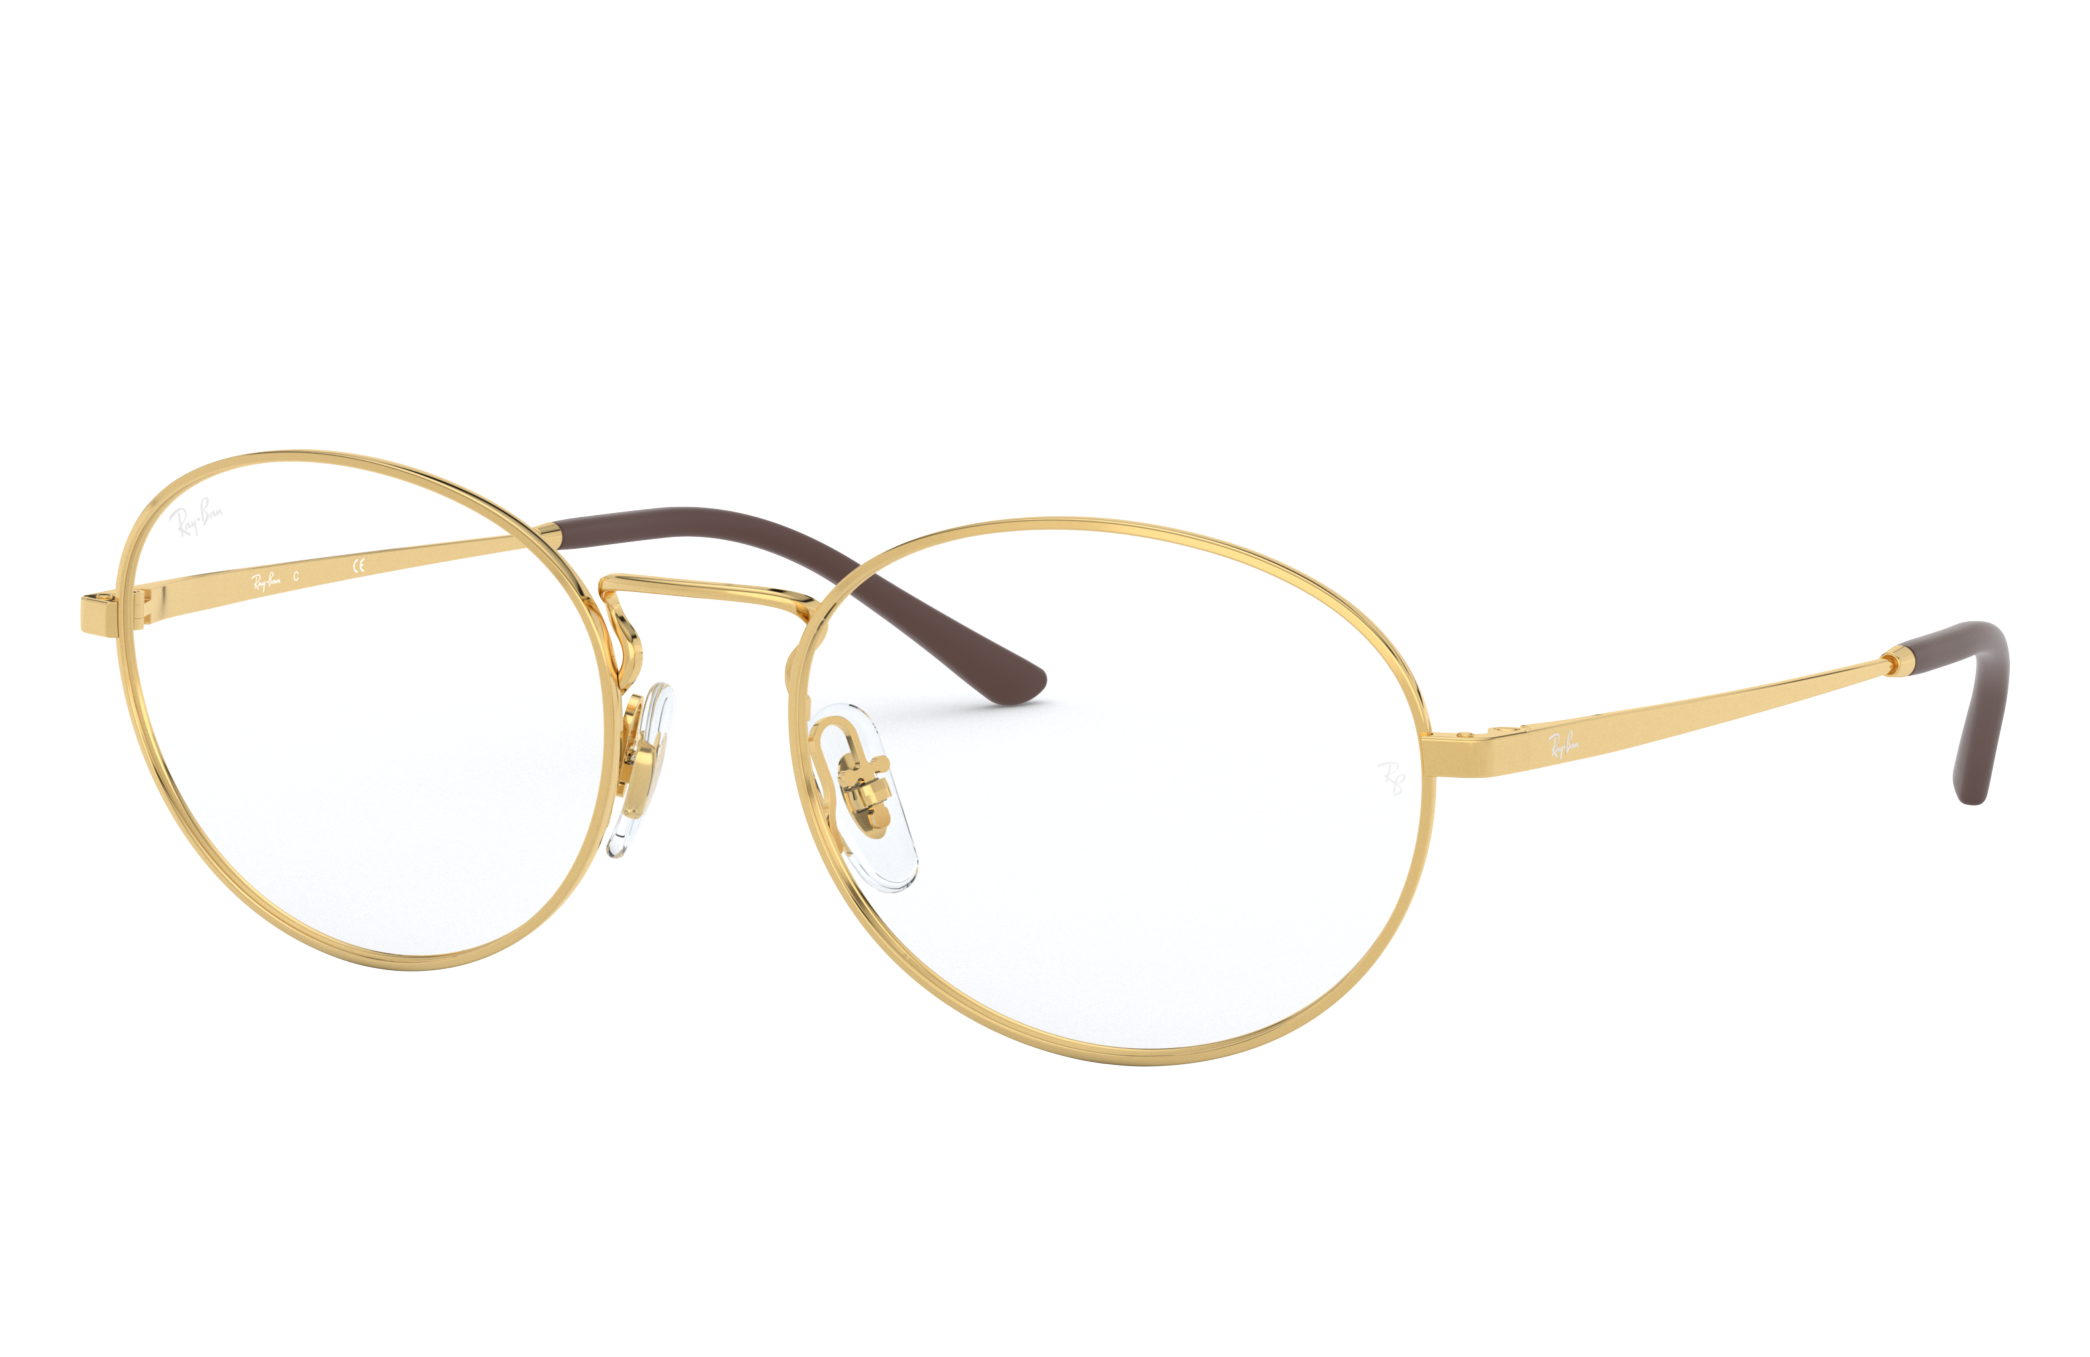 Rb6439 Eyeglasses with Gold Frame | Ray-Ban®